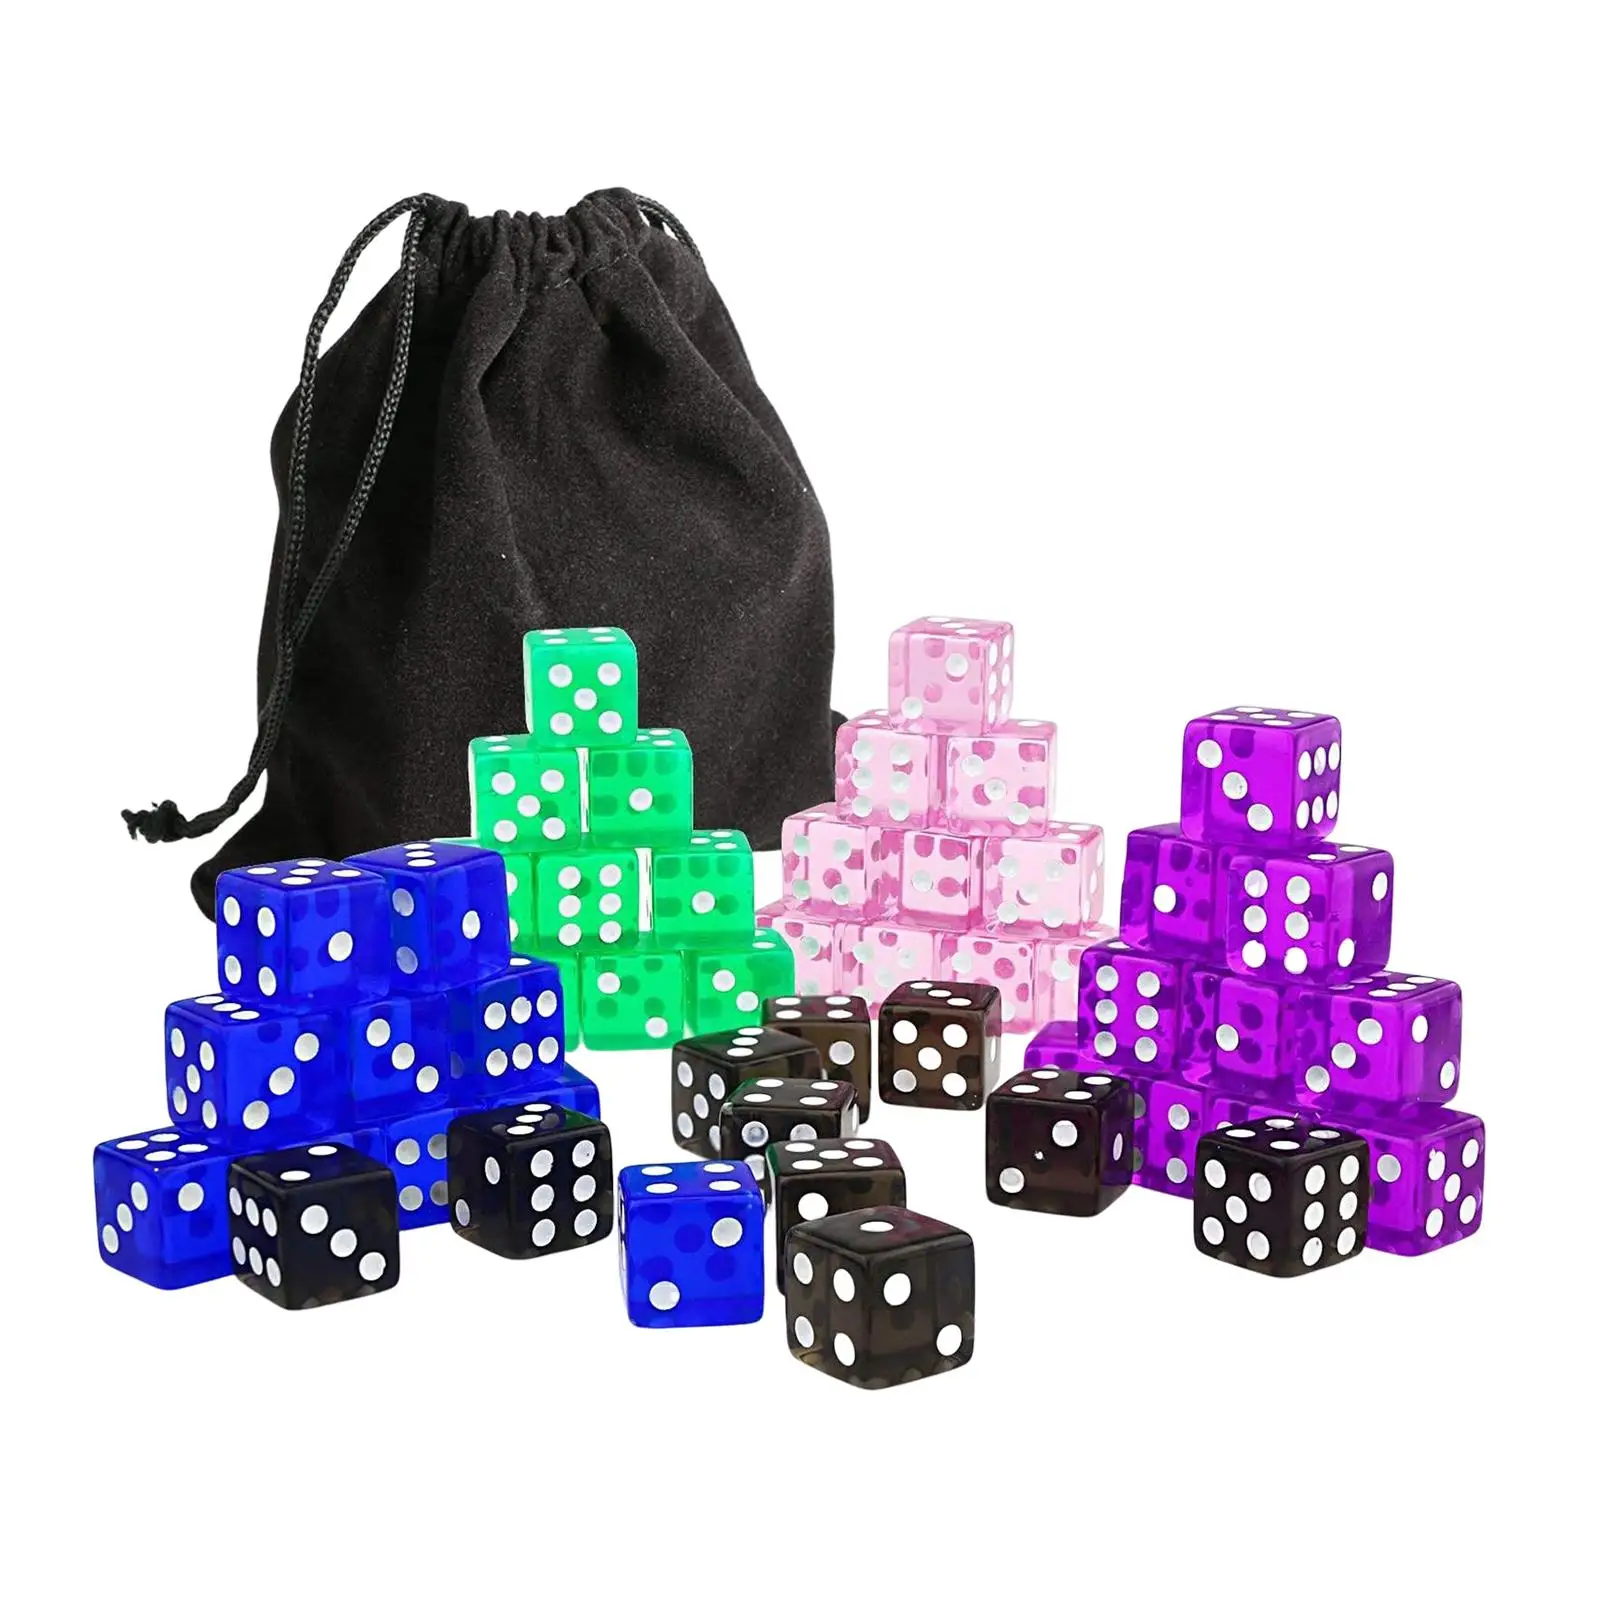 50x 6 Sided Dices Playing Dices Game Dices Colored Dices Math Teaching Toy Party Supplies 16mm Dices for Role Playing Game